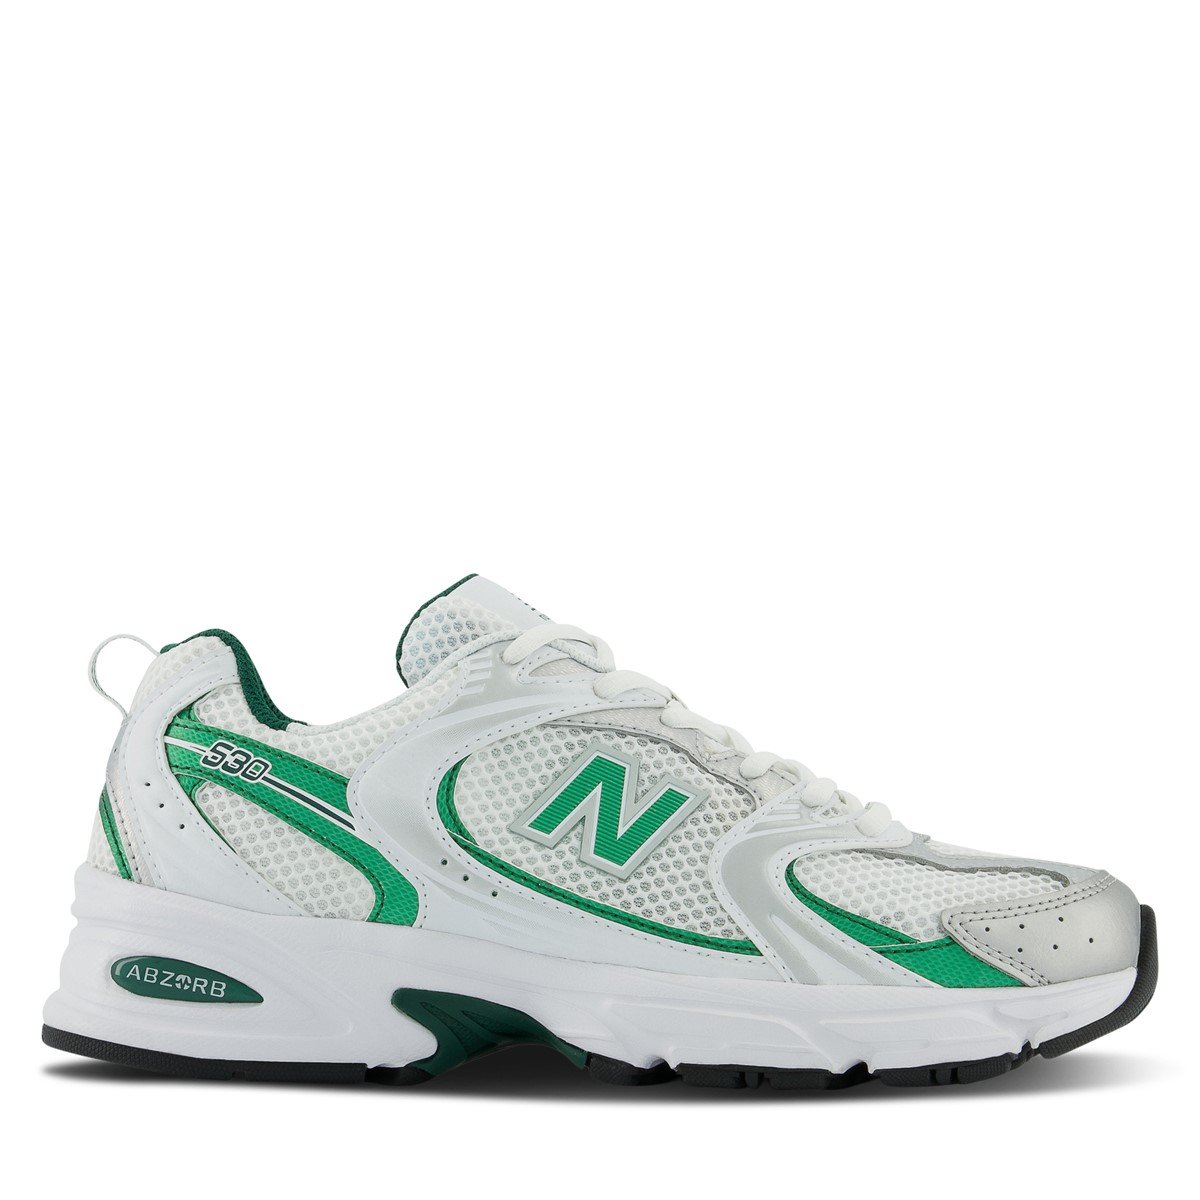 530 Sneakers in White/Green